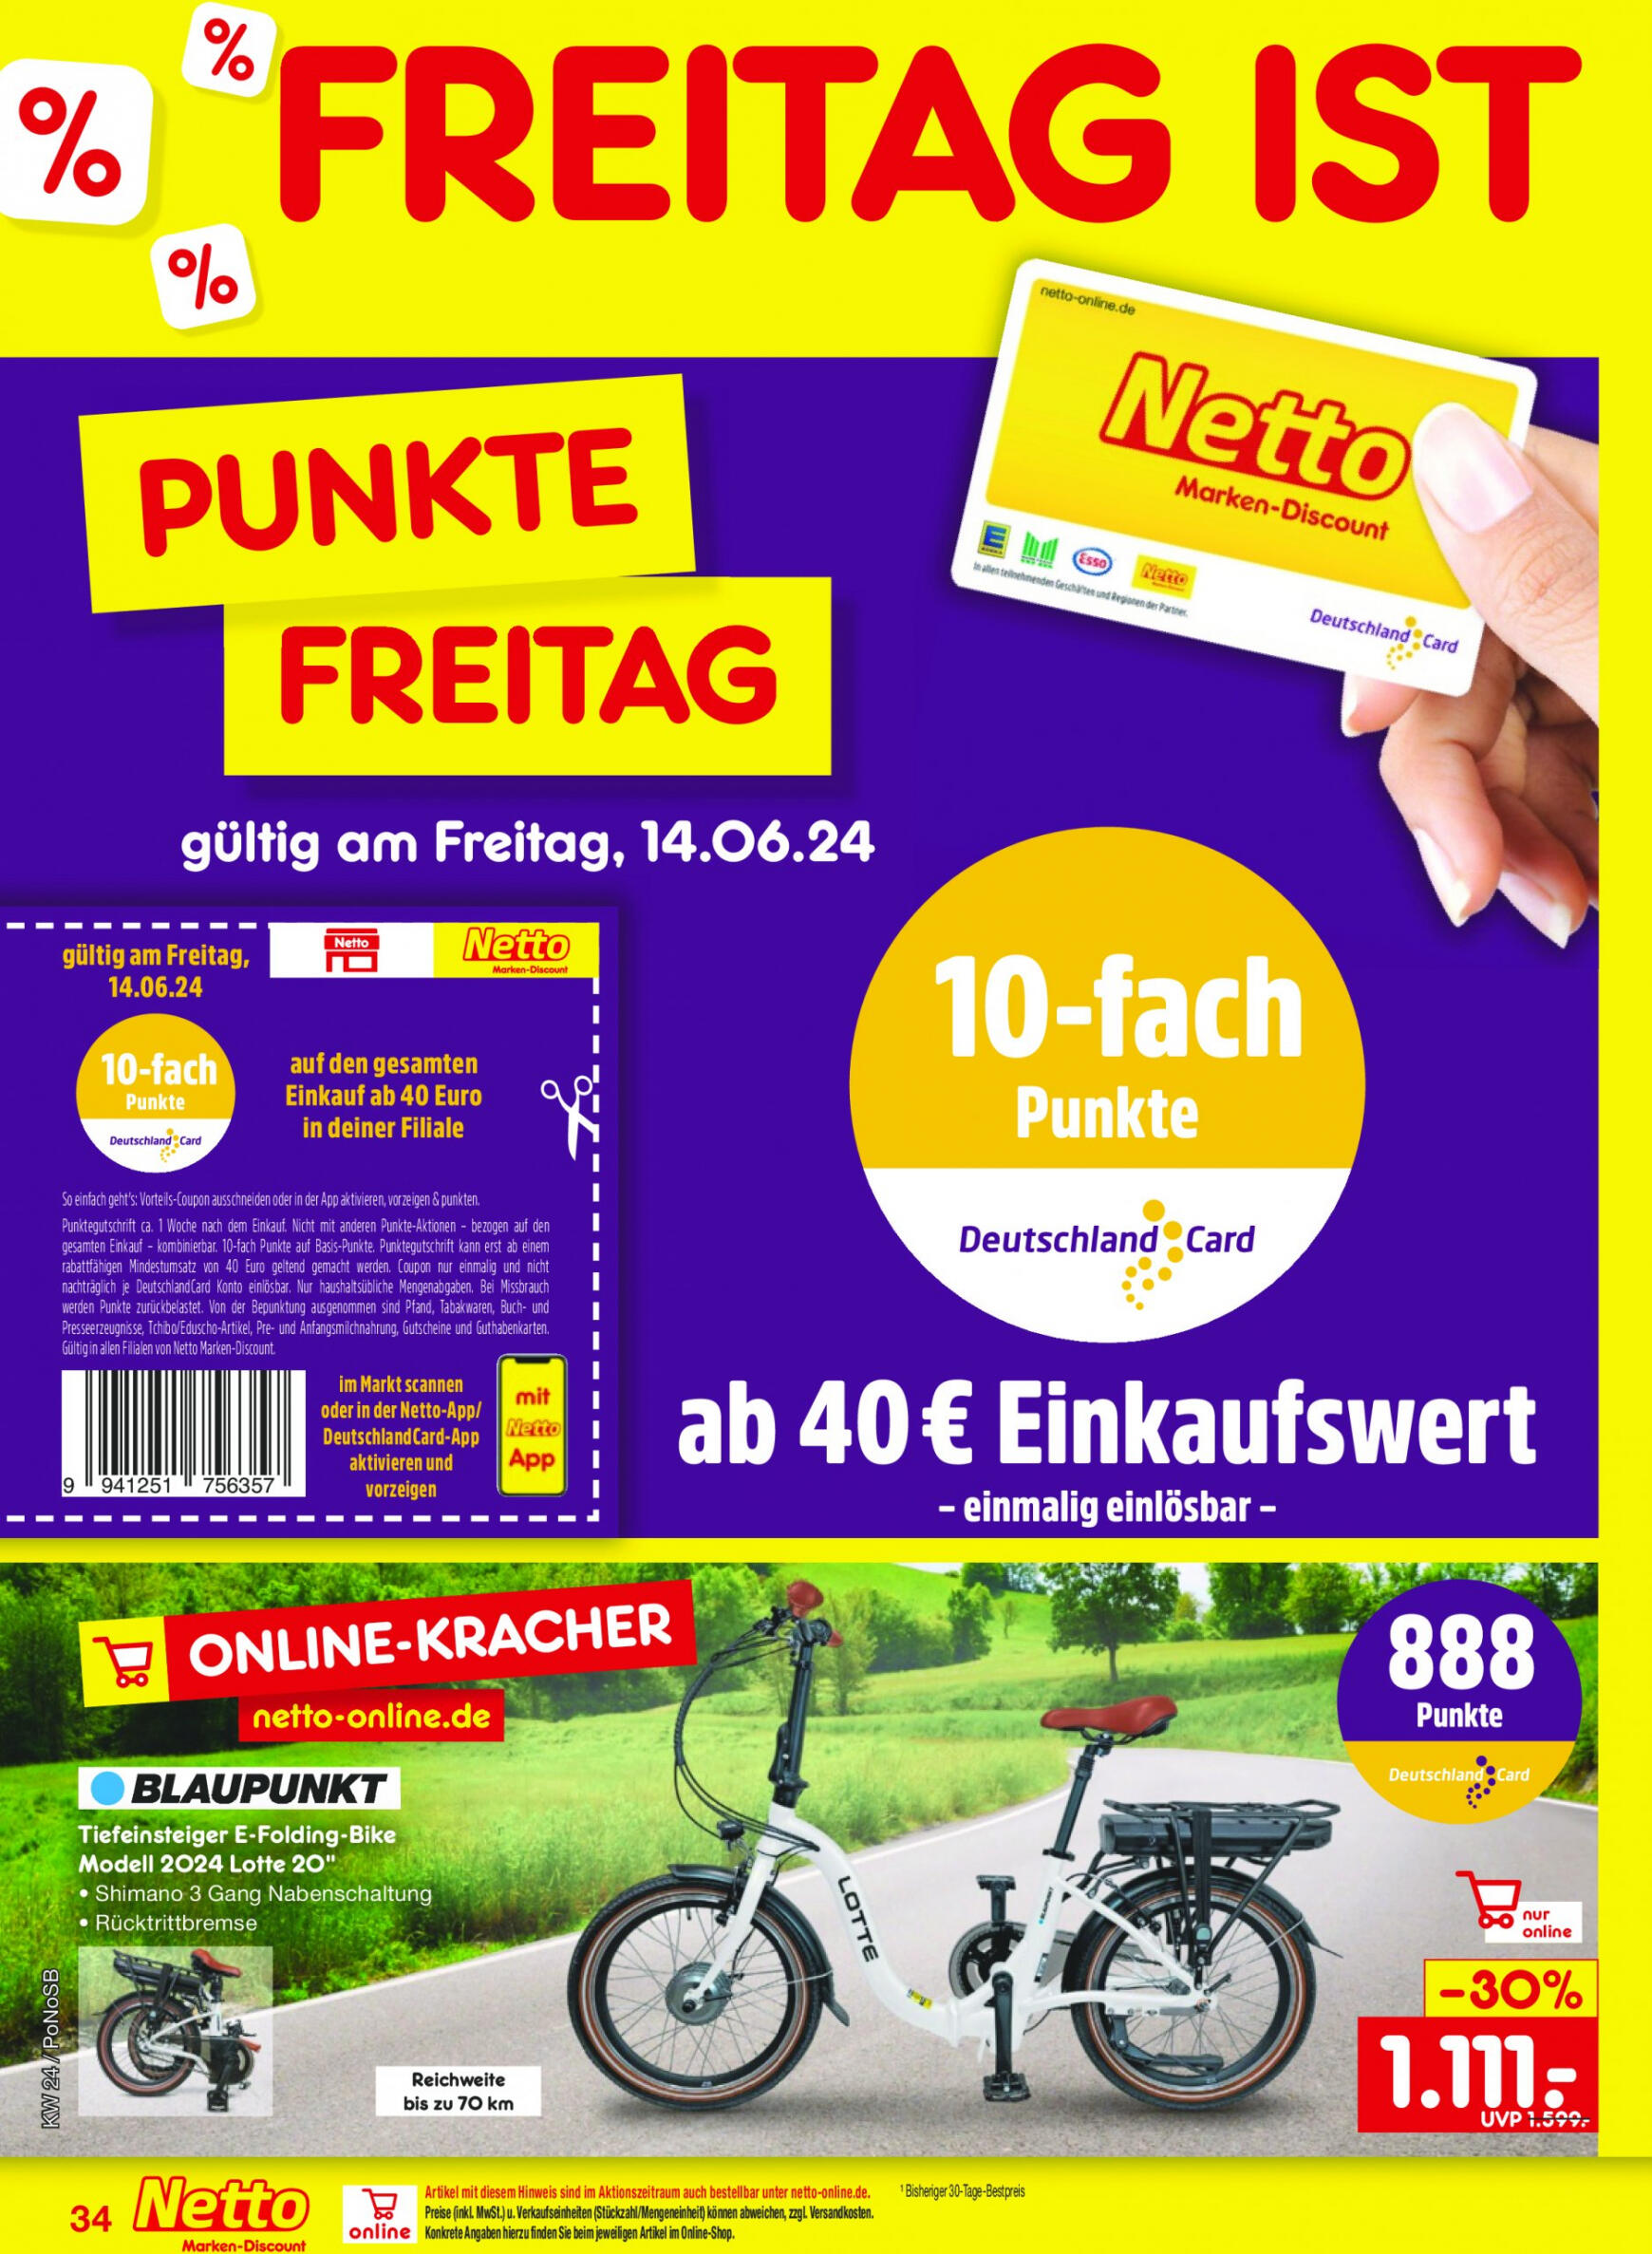 netto - Flyer Netto aktuell 10.06. - 15.06. - page: 50